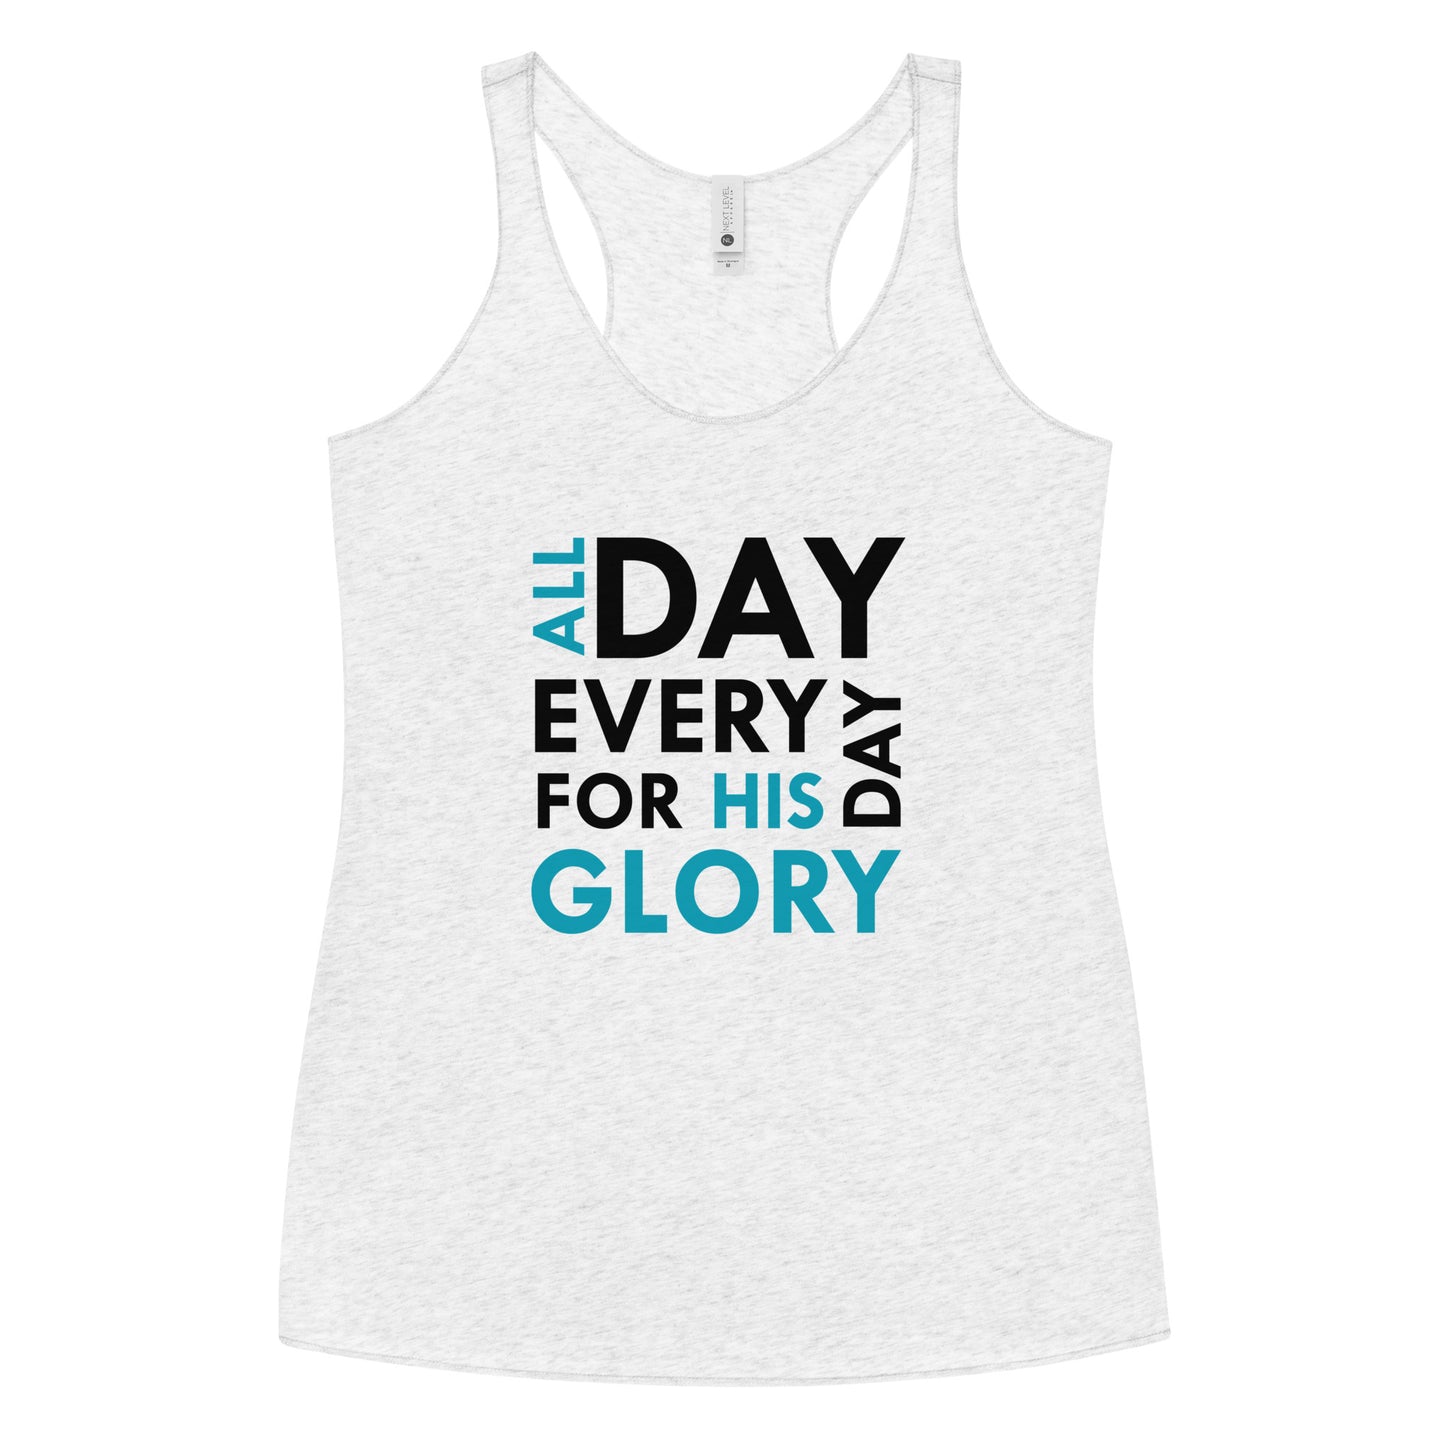 All His Glory Heather White w/Teal Women's Tank